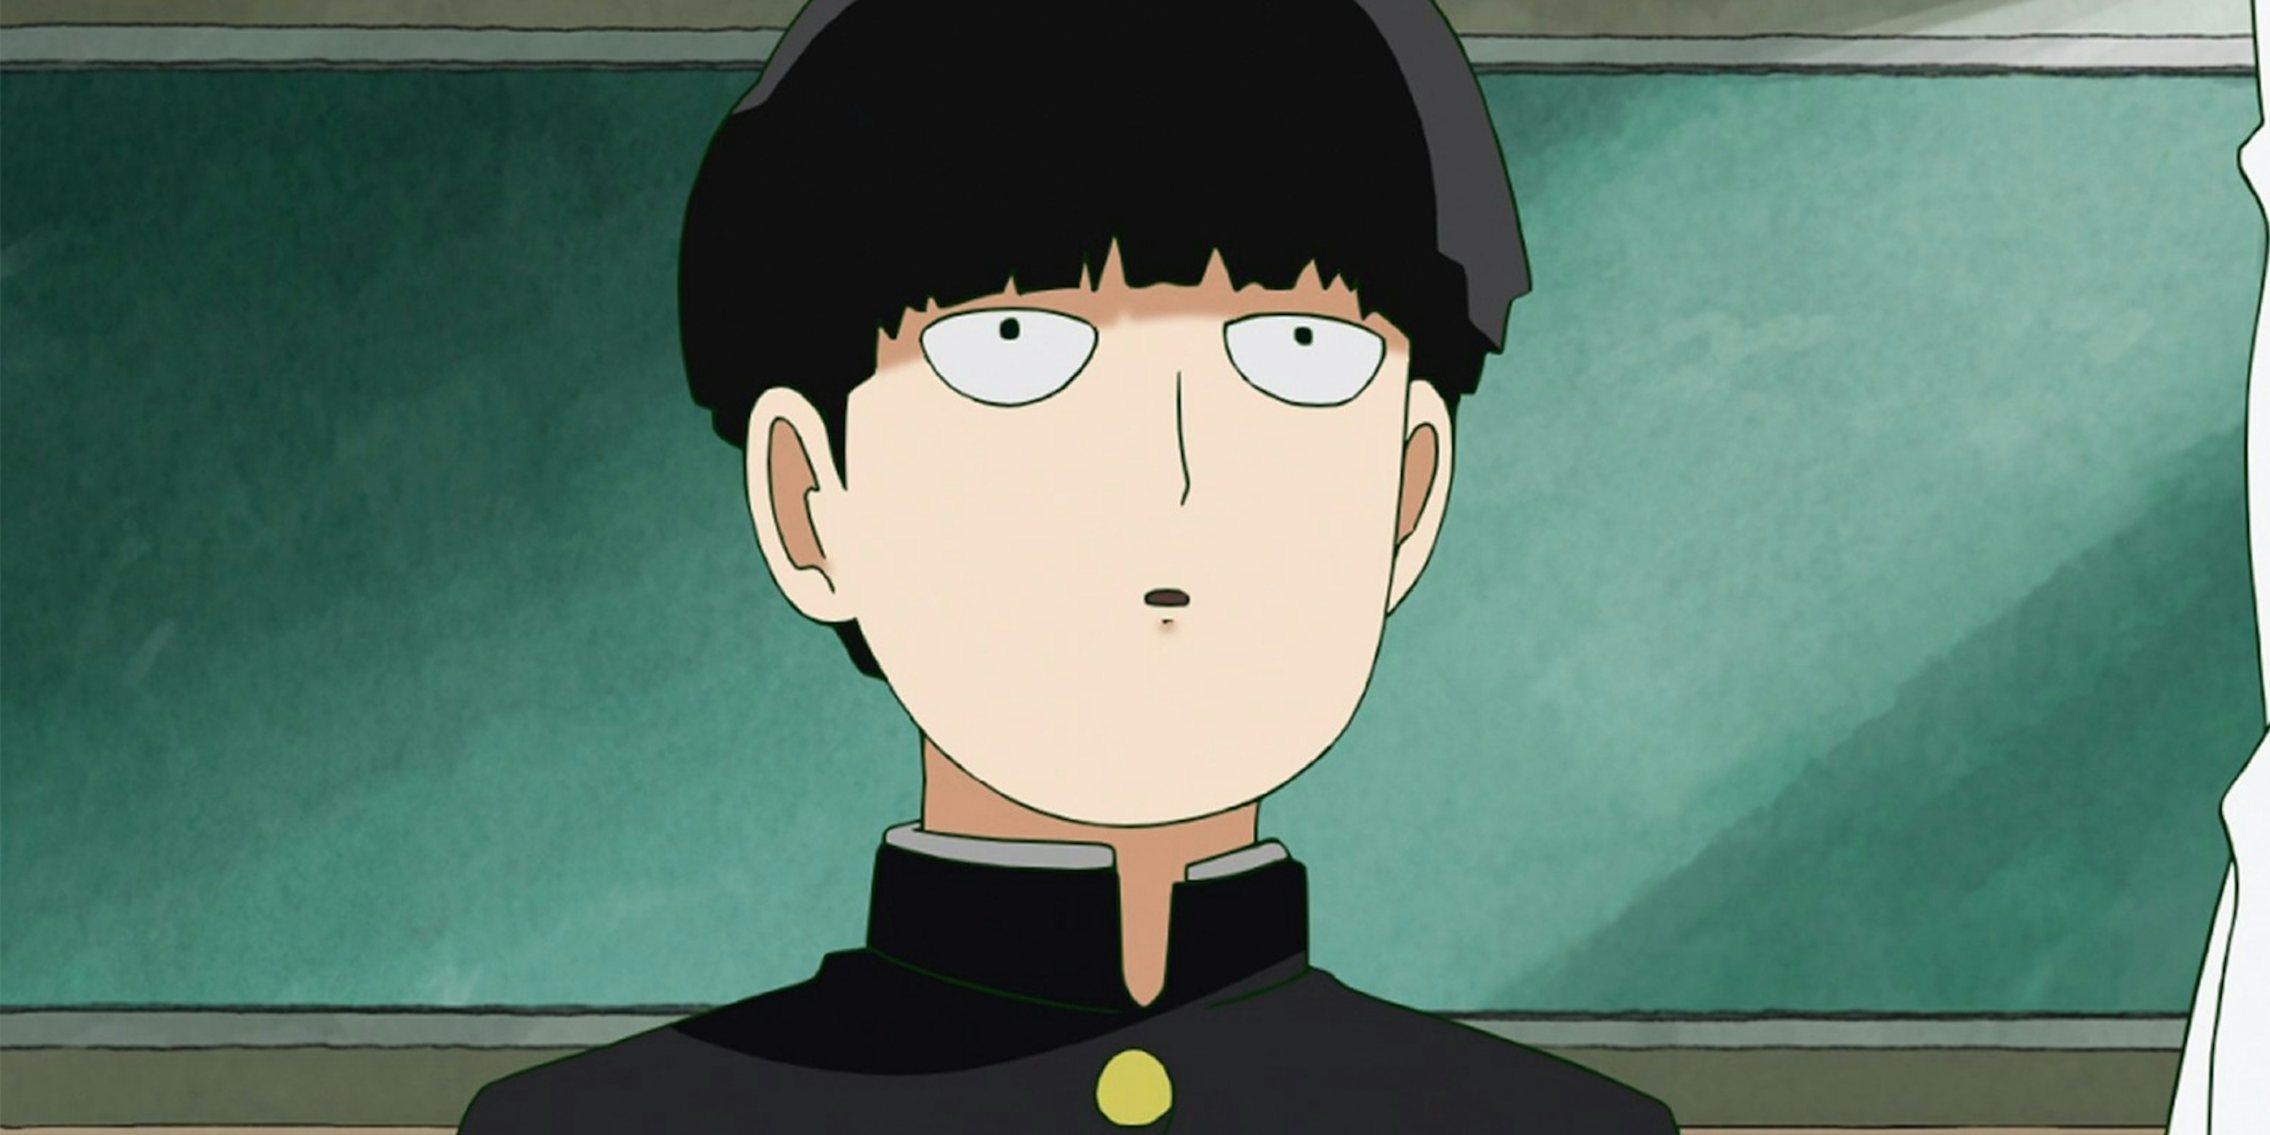 Crunchyroll may be replacing Mob's voice actor in Mob Psycho 100